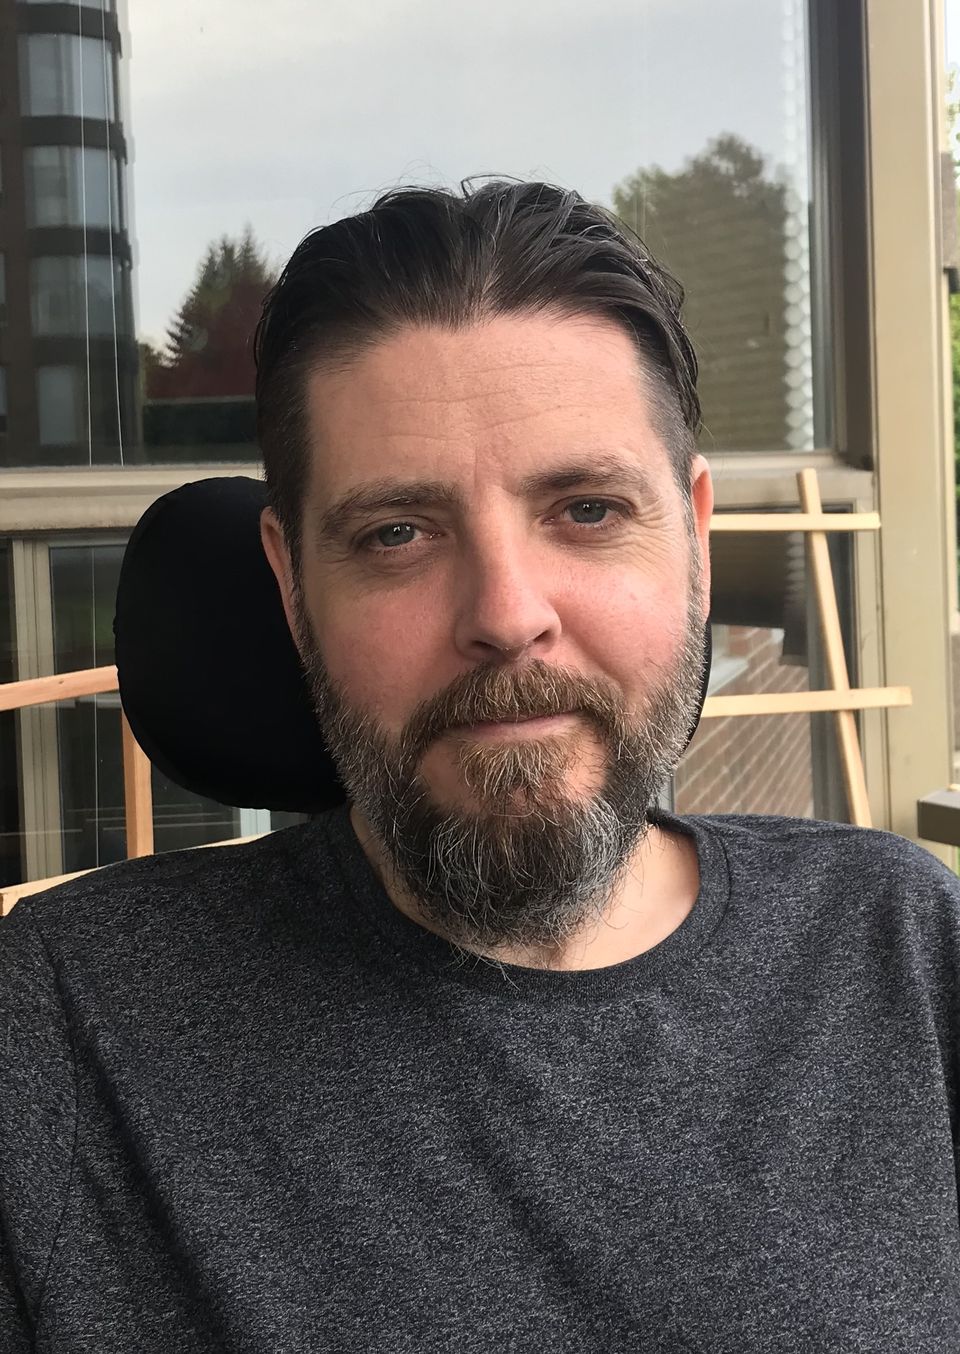 Adam Welburn-Ross, a patient with ALS, wears a grey shirt and looks into the camera. He has a salt-and-pepper beard with brown hair combed back.